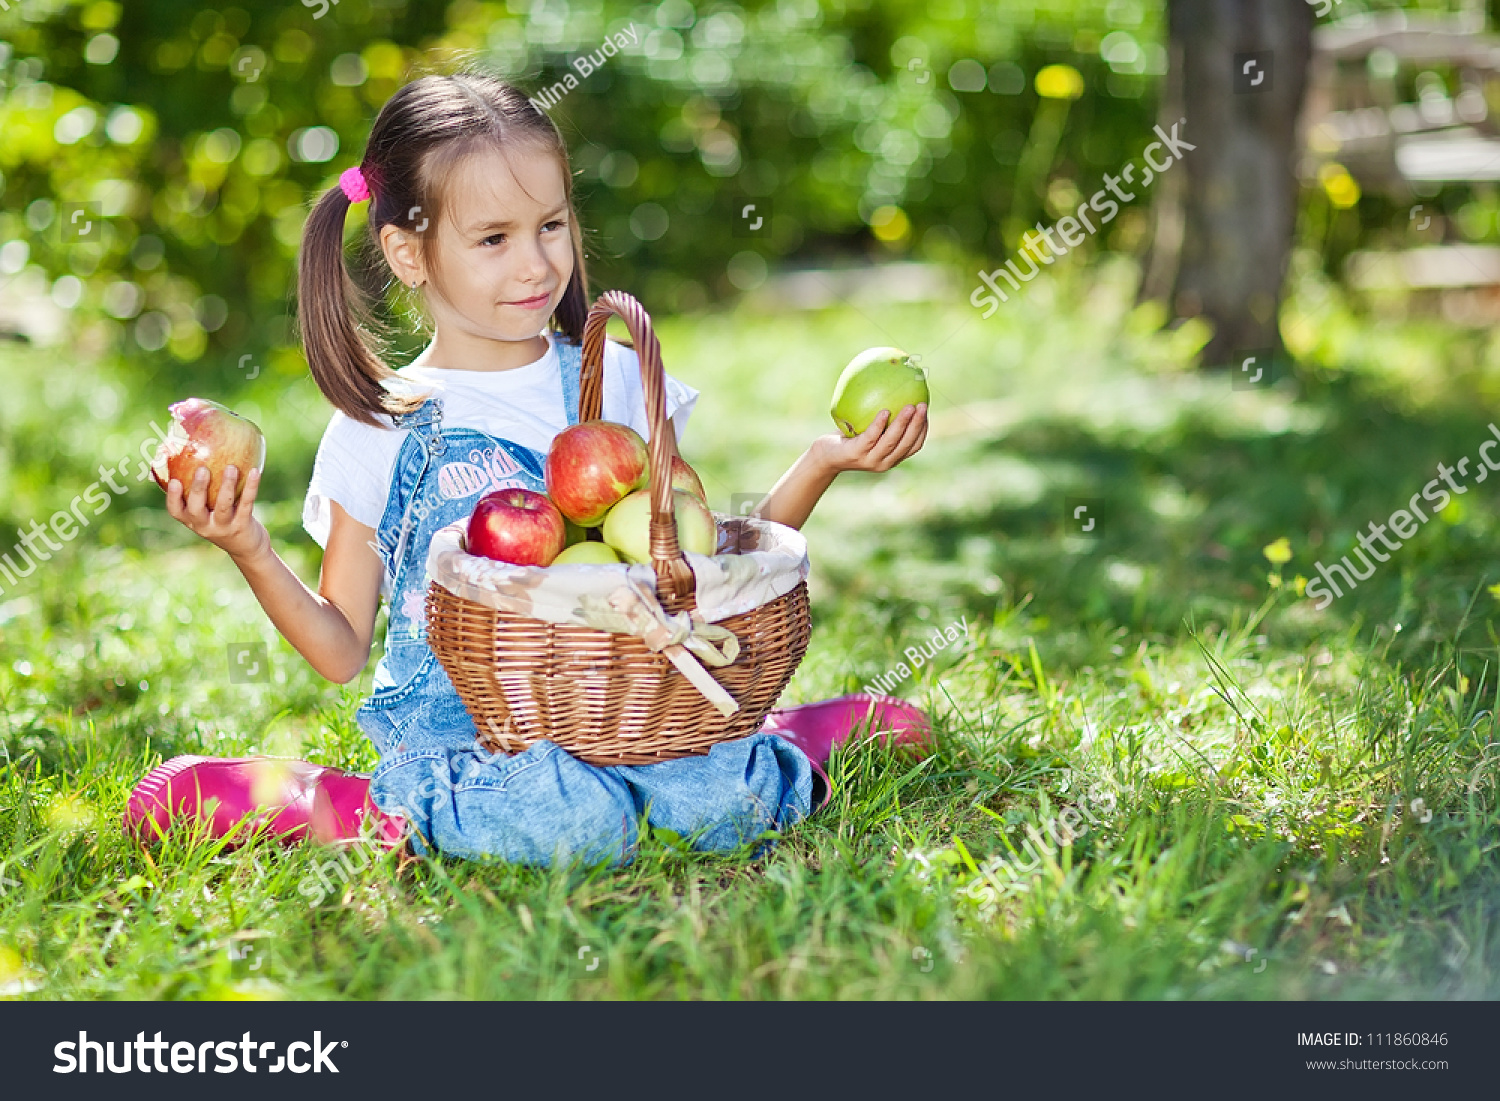 Little girl with fruit. #111860846